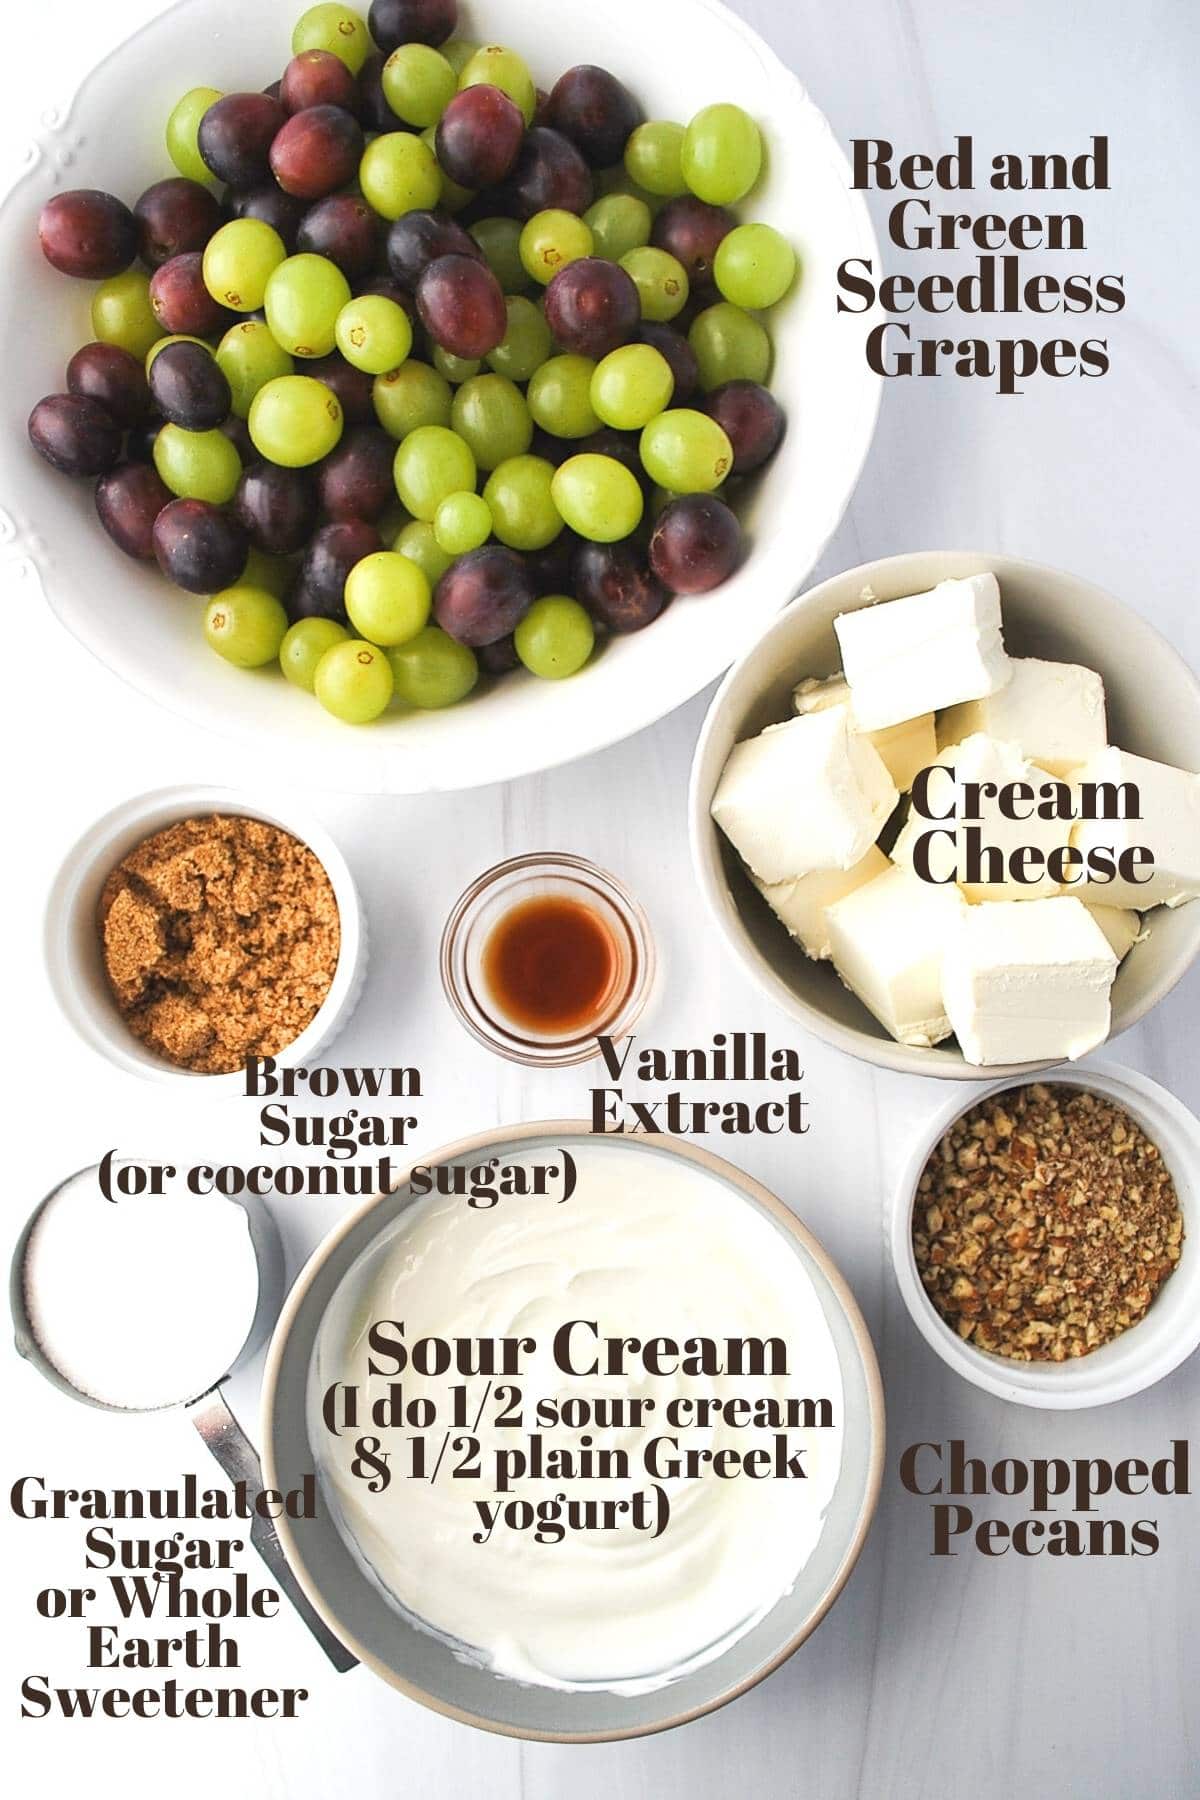 ingredients for grape salad in measuring bowls ready to assemble